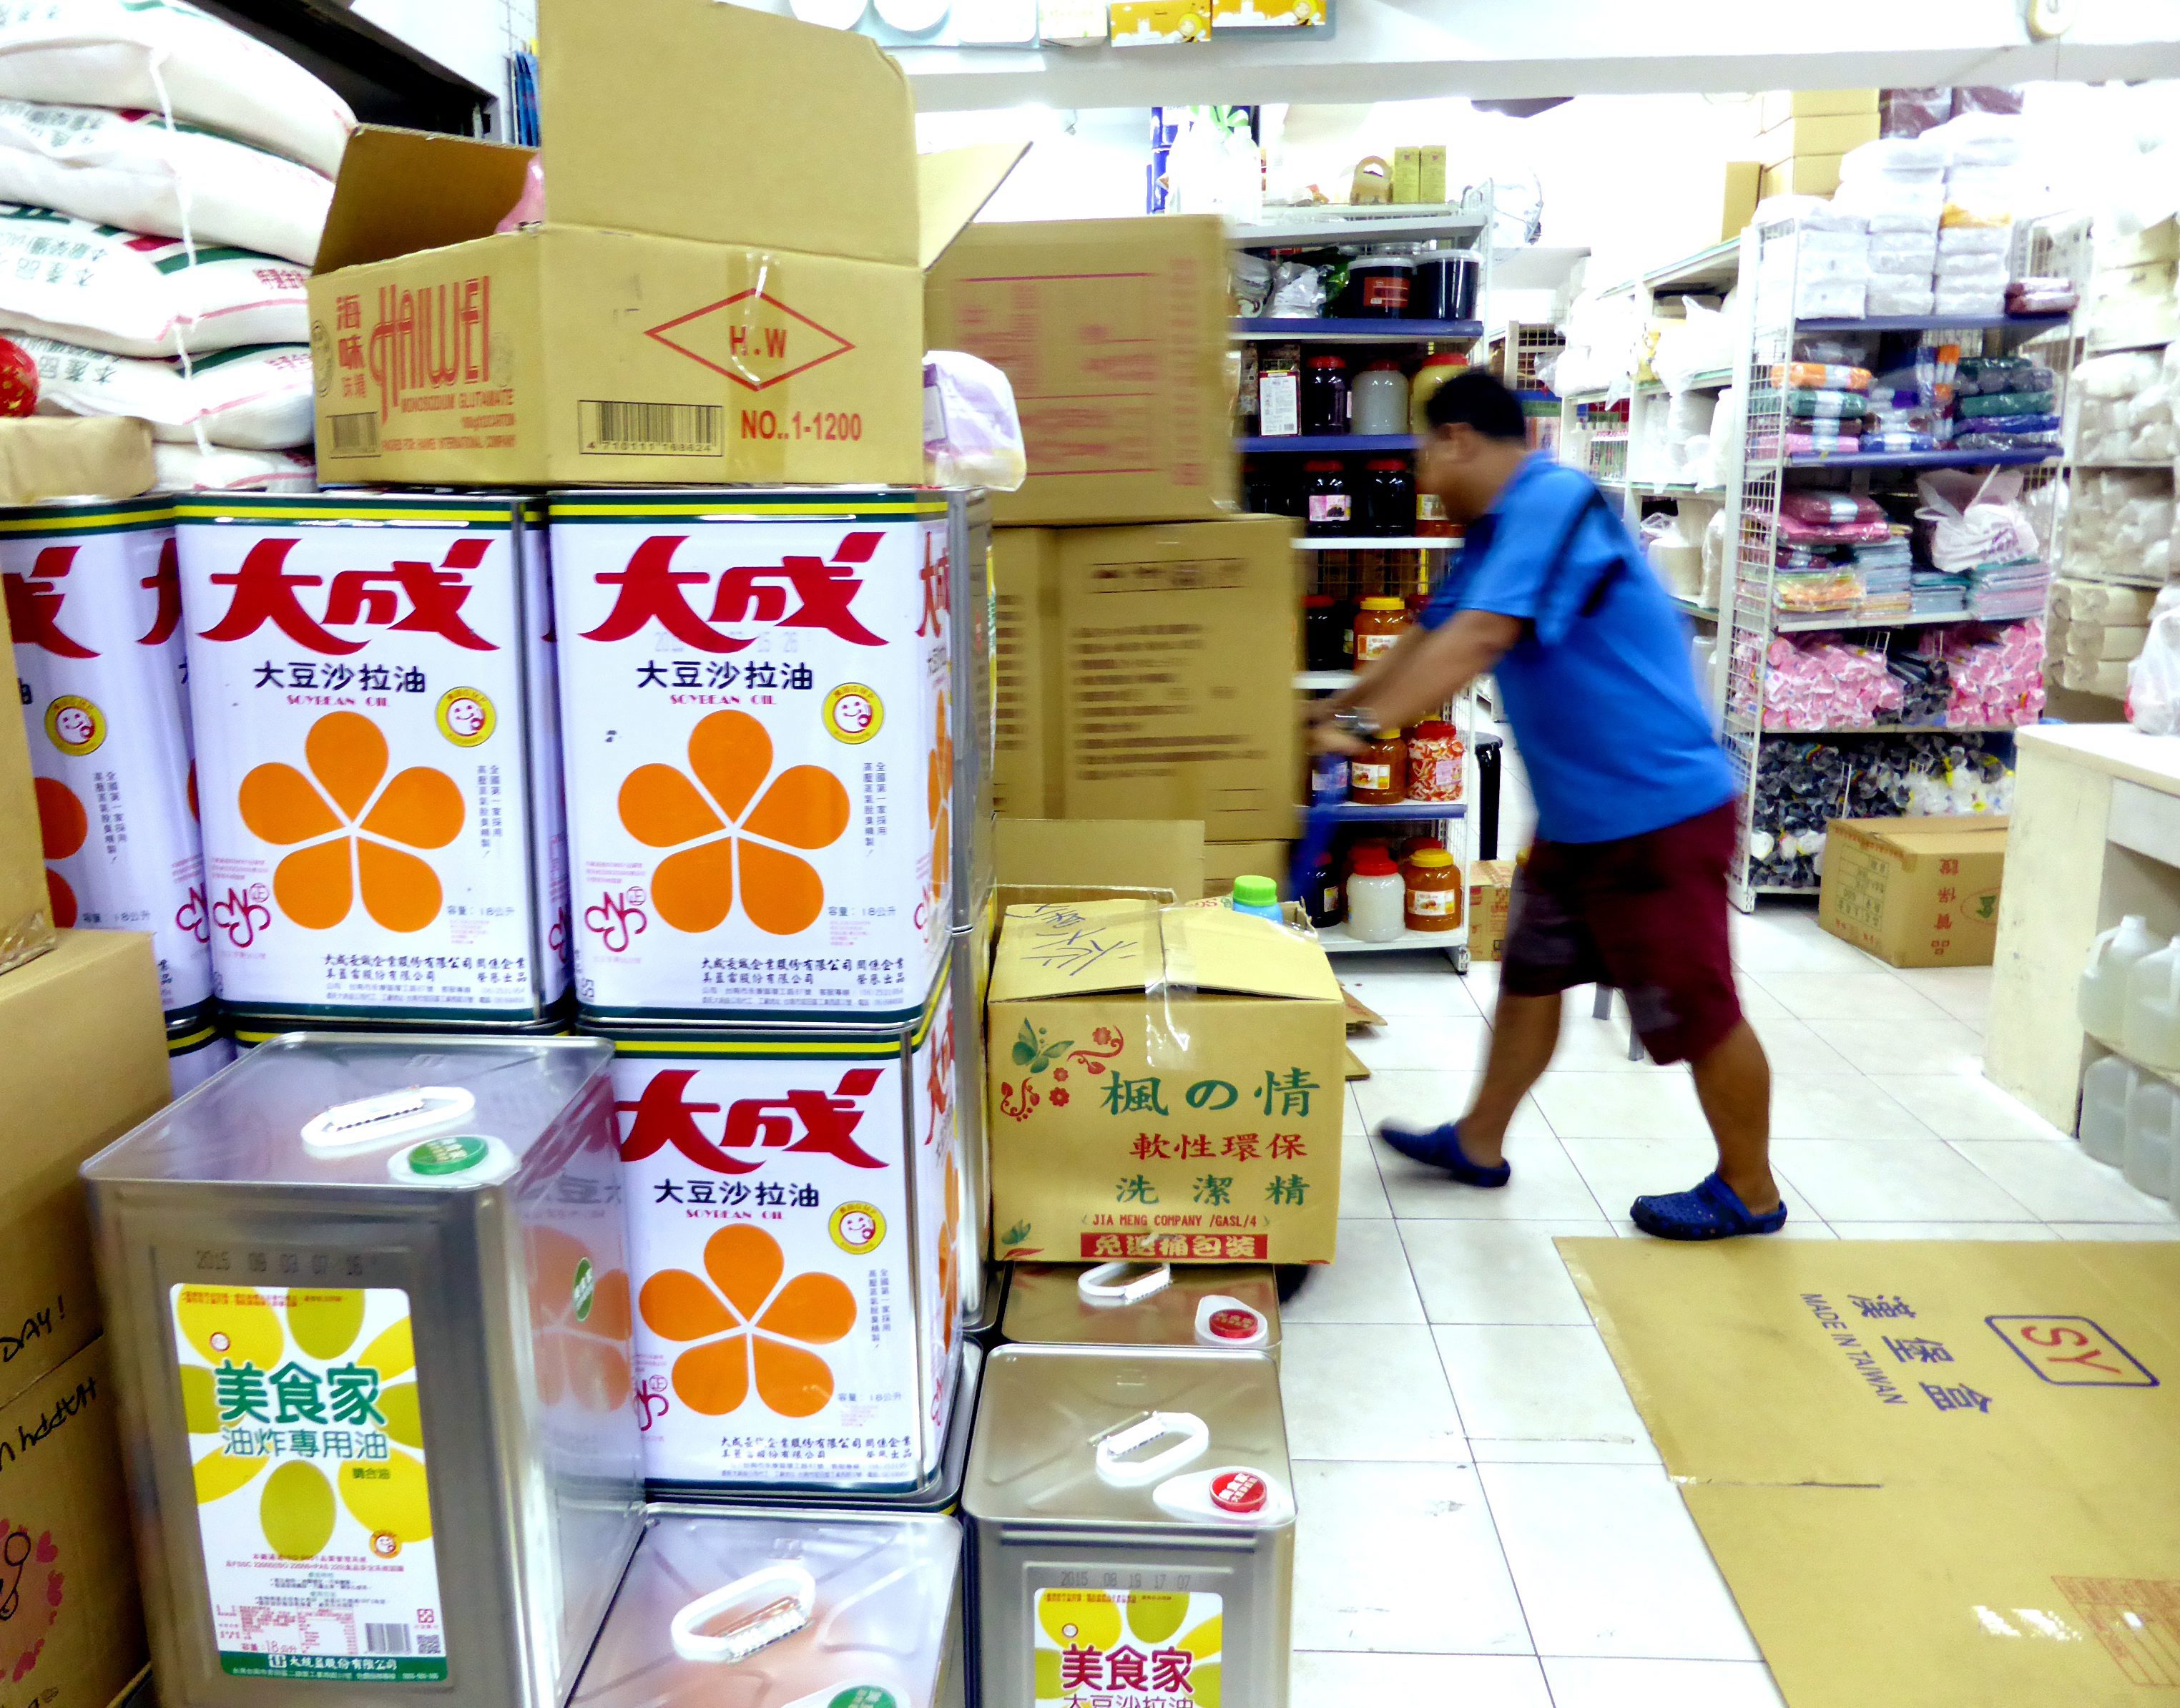 Cans containing cooking oil are stacked in a food retailer's shop in Taipei. Photo: EPA